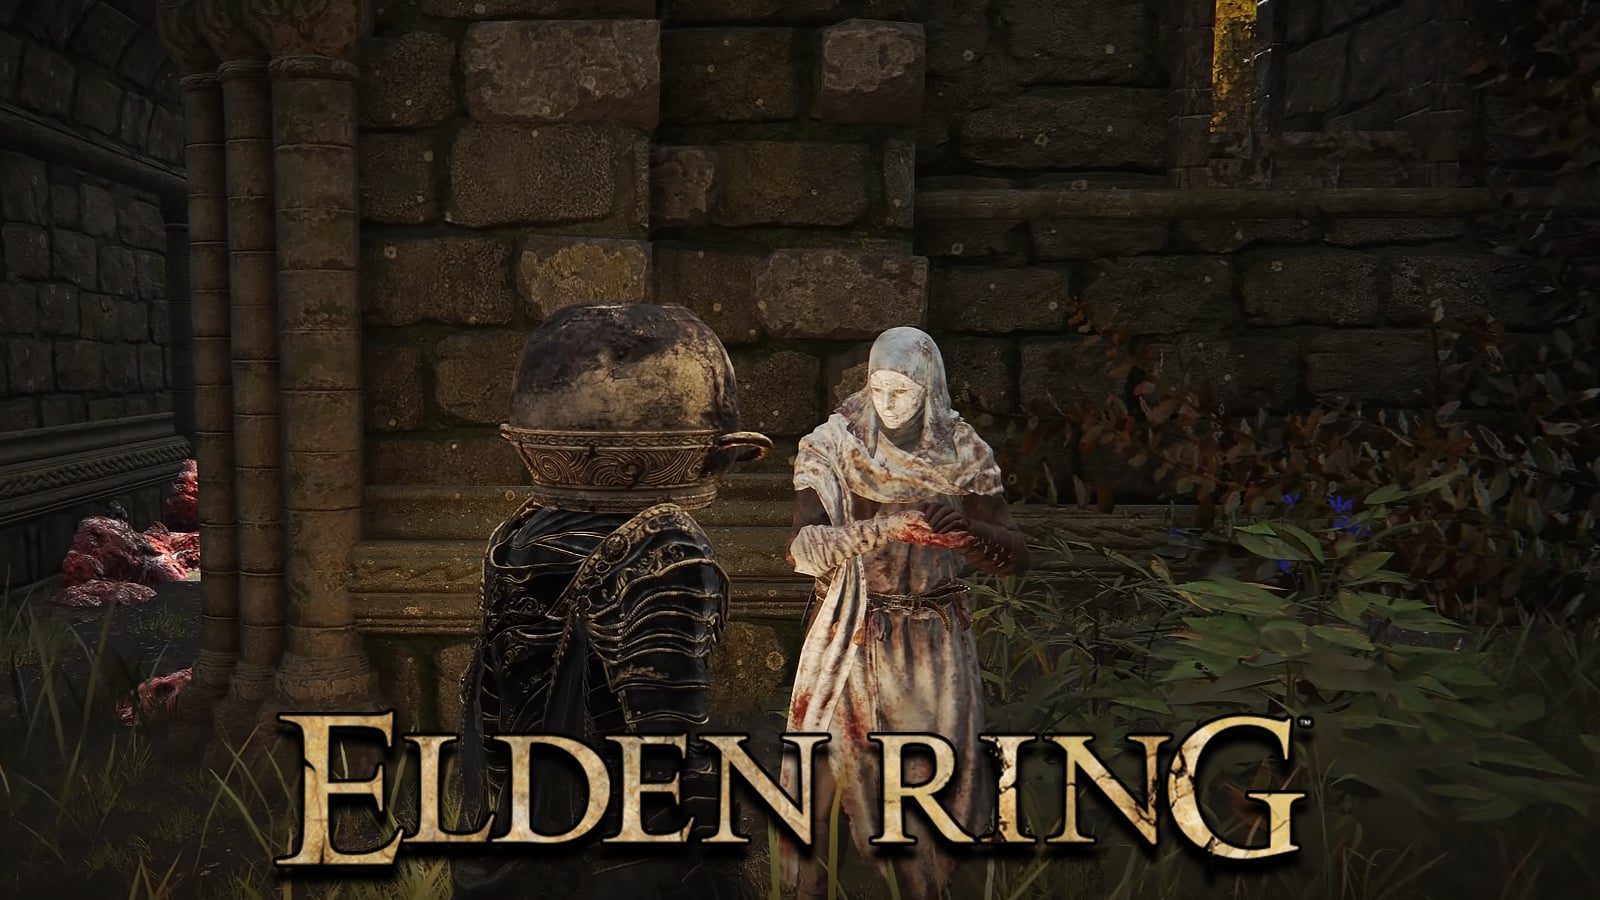 Simple-elden-ring-exploit-gives-players-thousands-of-runes-in-seconds-2528970